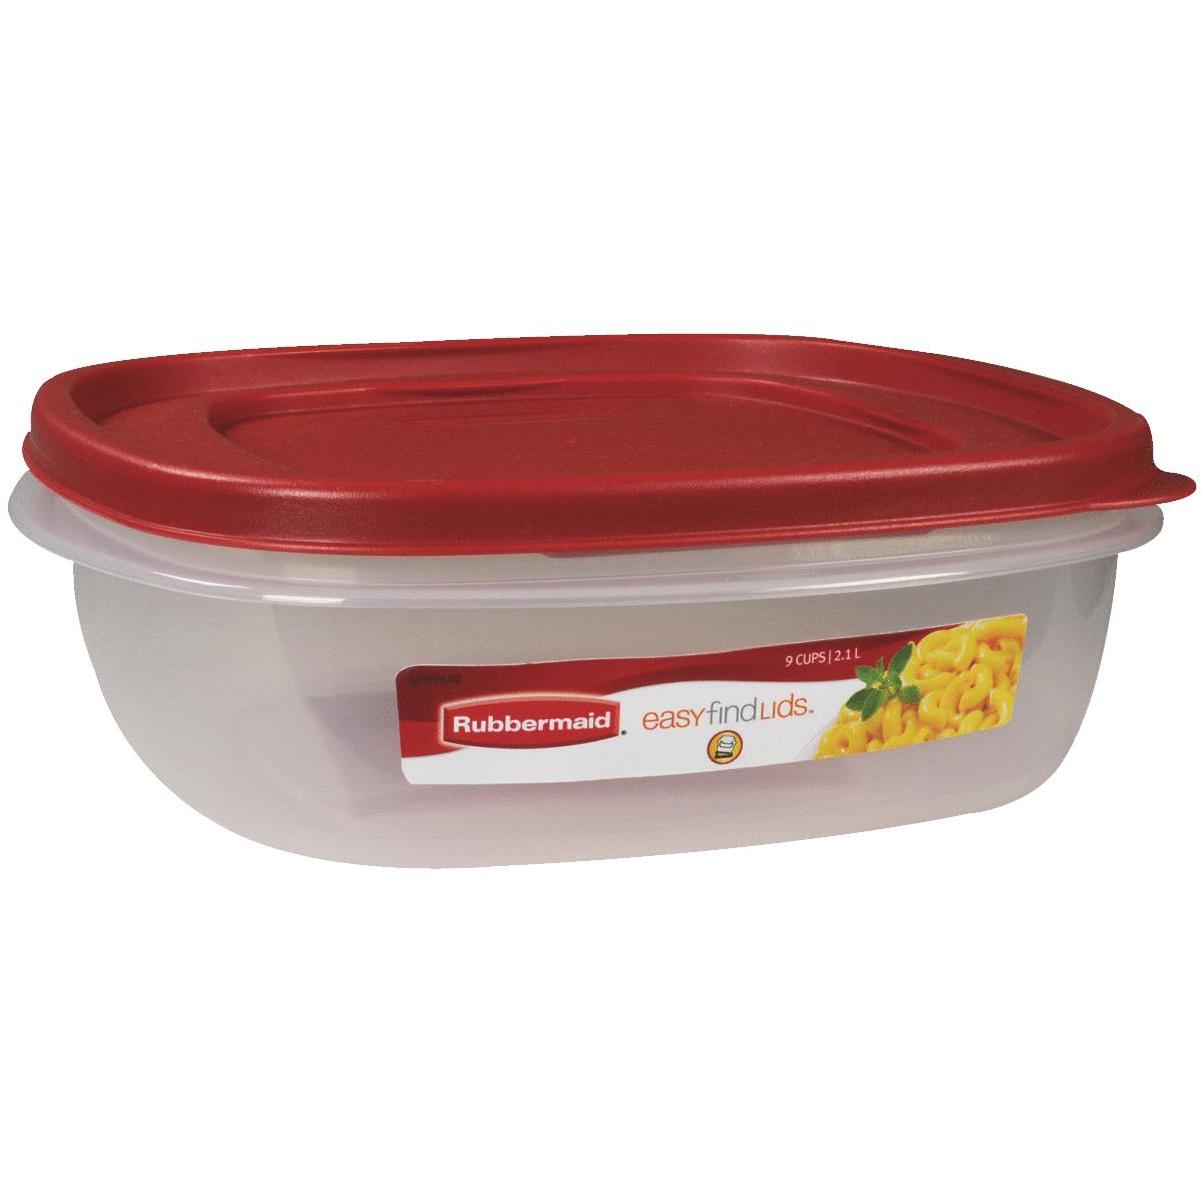 Rubbermaid 9 Cup And 14 Cup Storage Container Value Pack With Easy Find Lids, Food Storage, Household